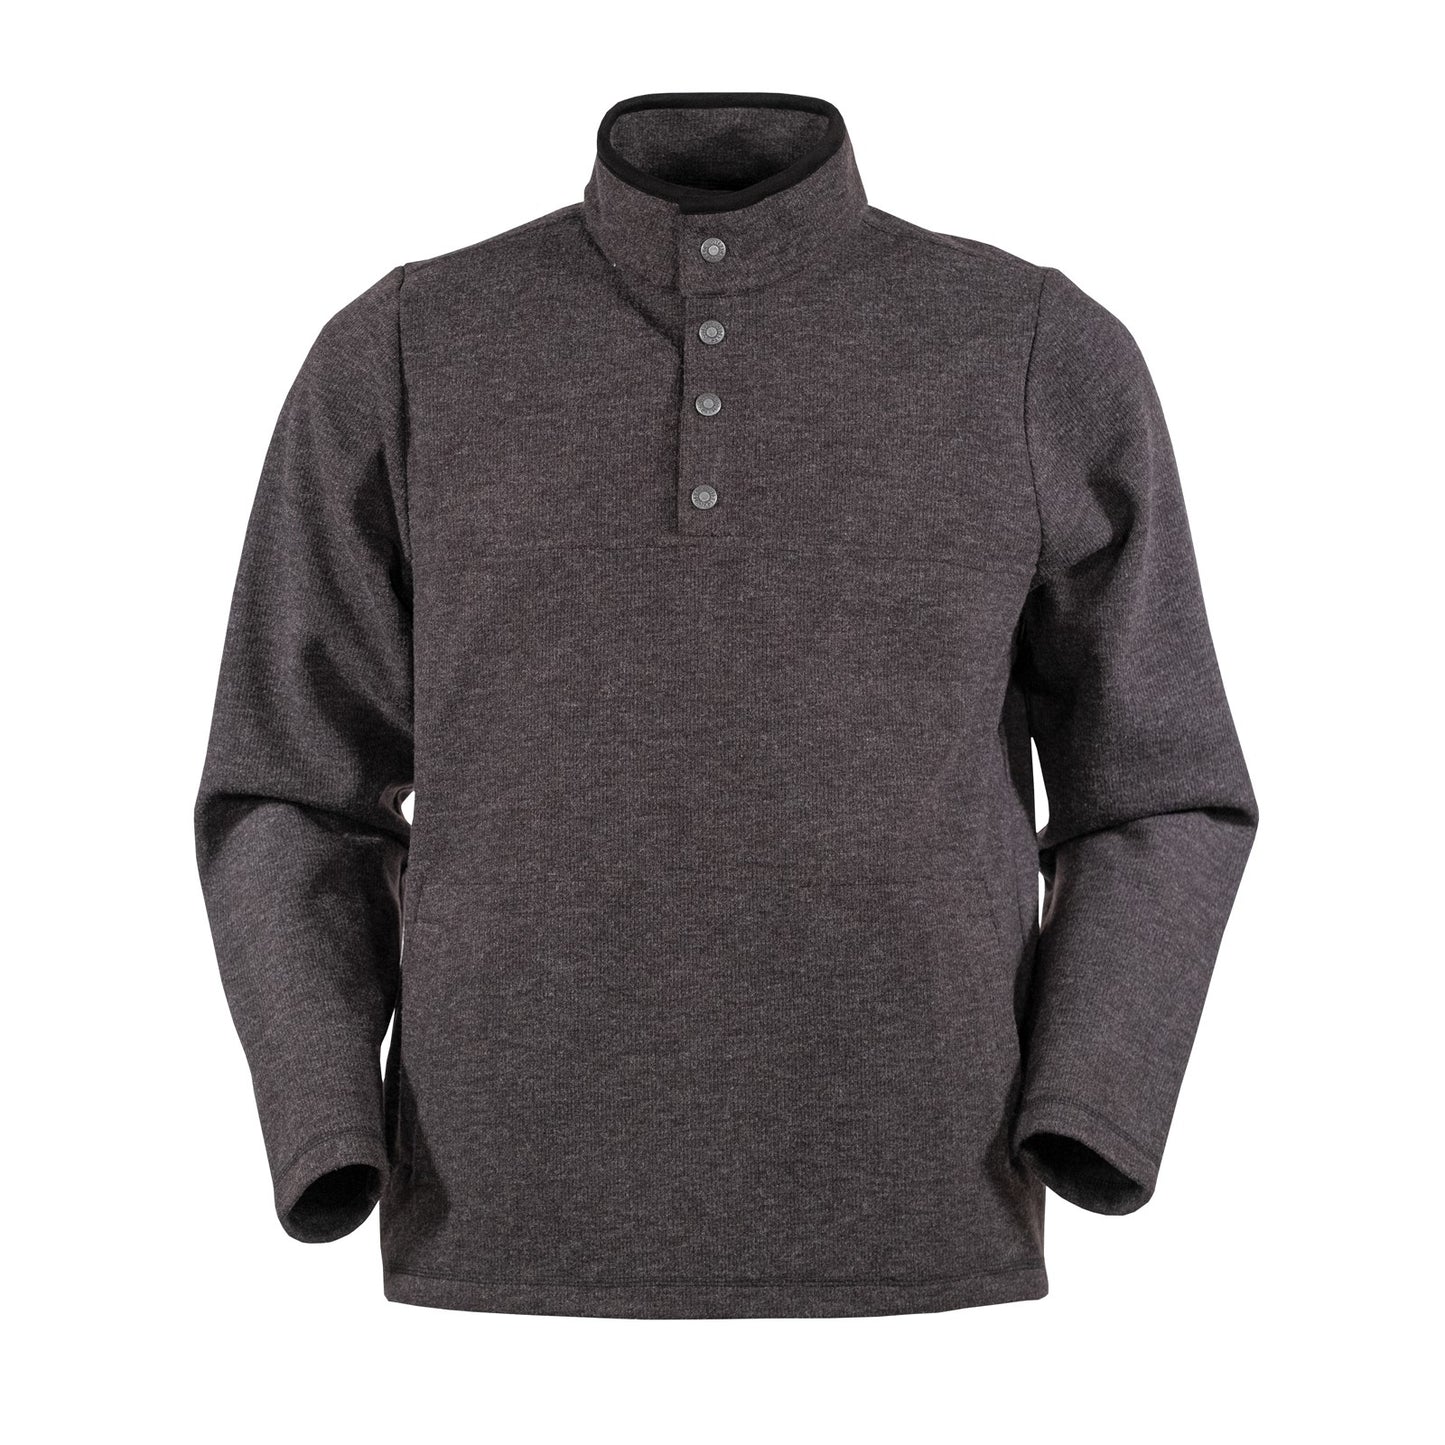 Outback Trading Company Men's Gavin Charcoal Henley Pullover 48732-CHR